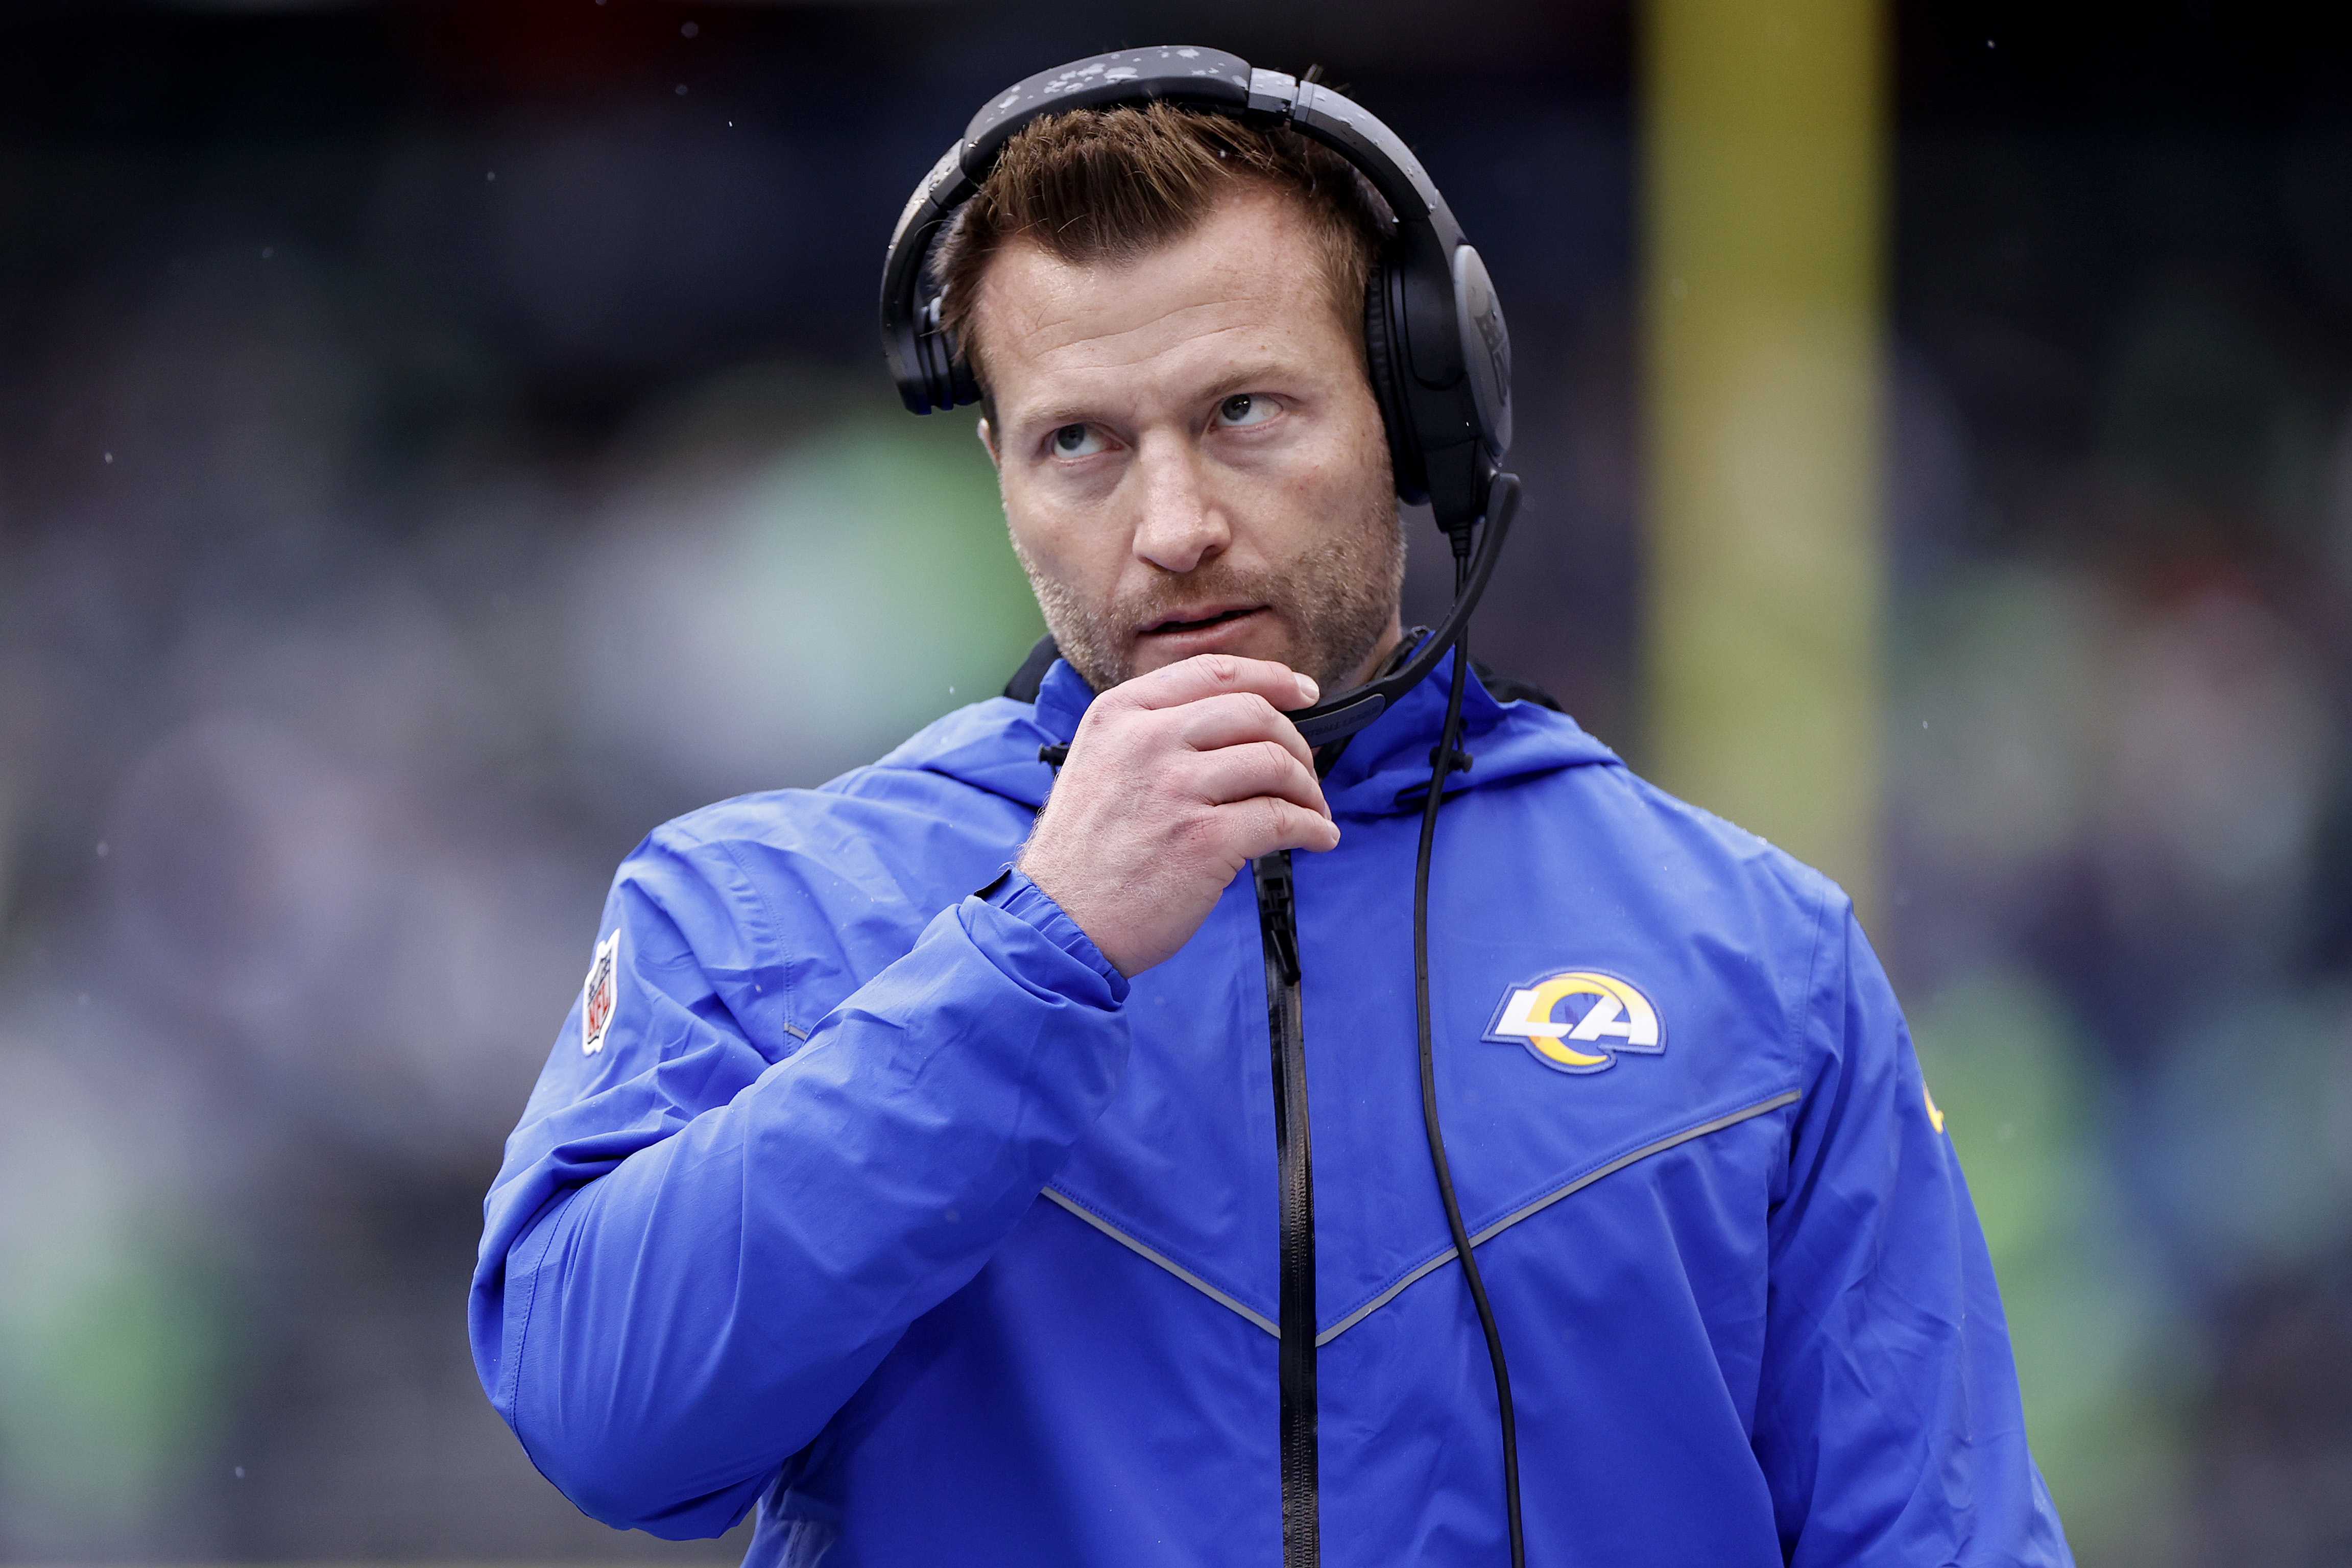 Sean McVay explains why he returned to Rams instead of TV job